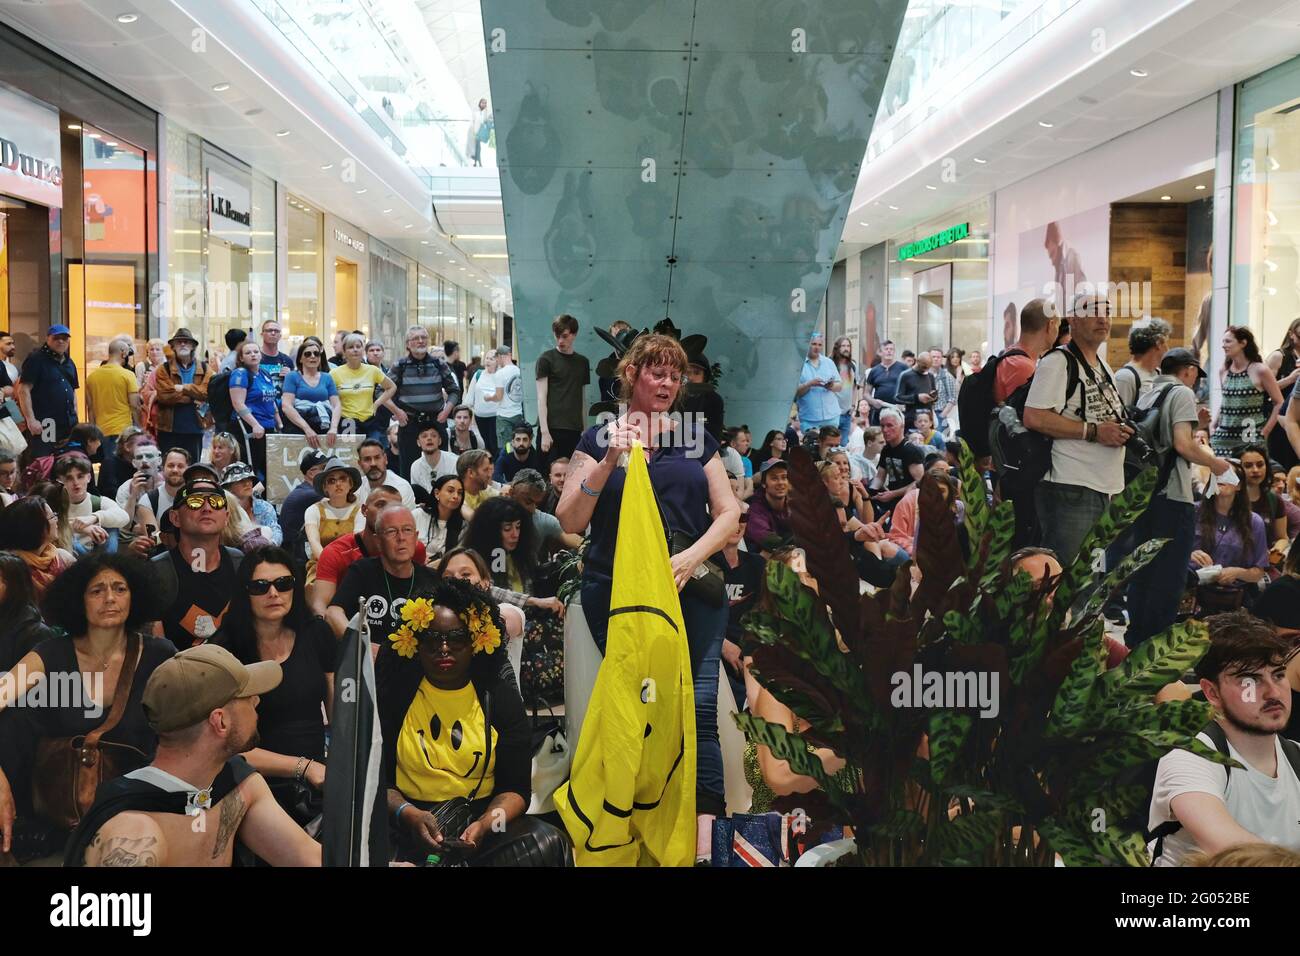 London, UK. 29/05/21. Protesters staging a 'Unite for Freedom' demonstration entered Westfield Shopping Centre until they were ejected by police. Stock Photo